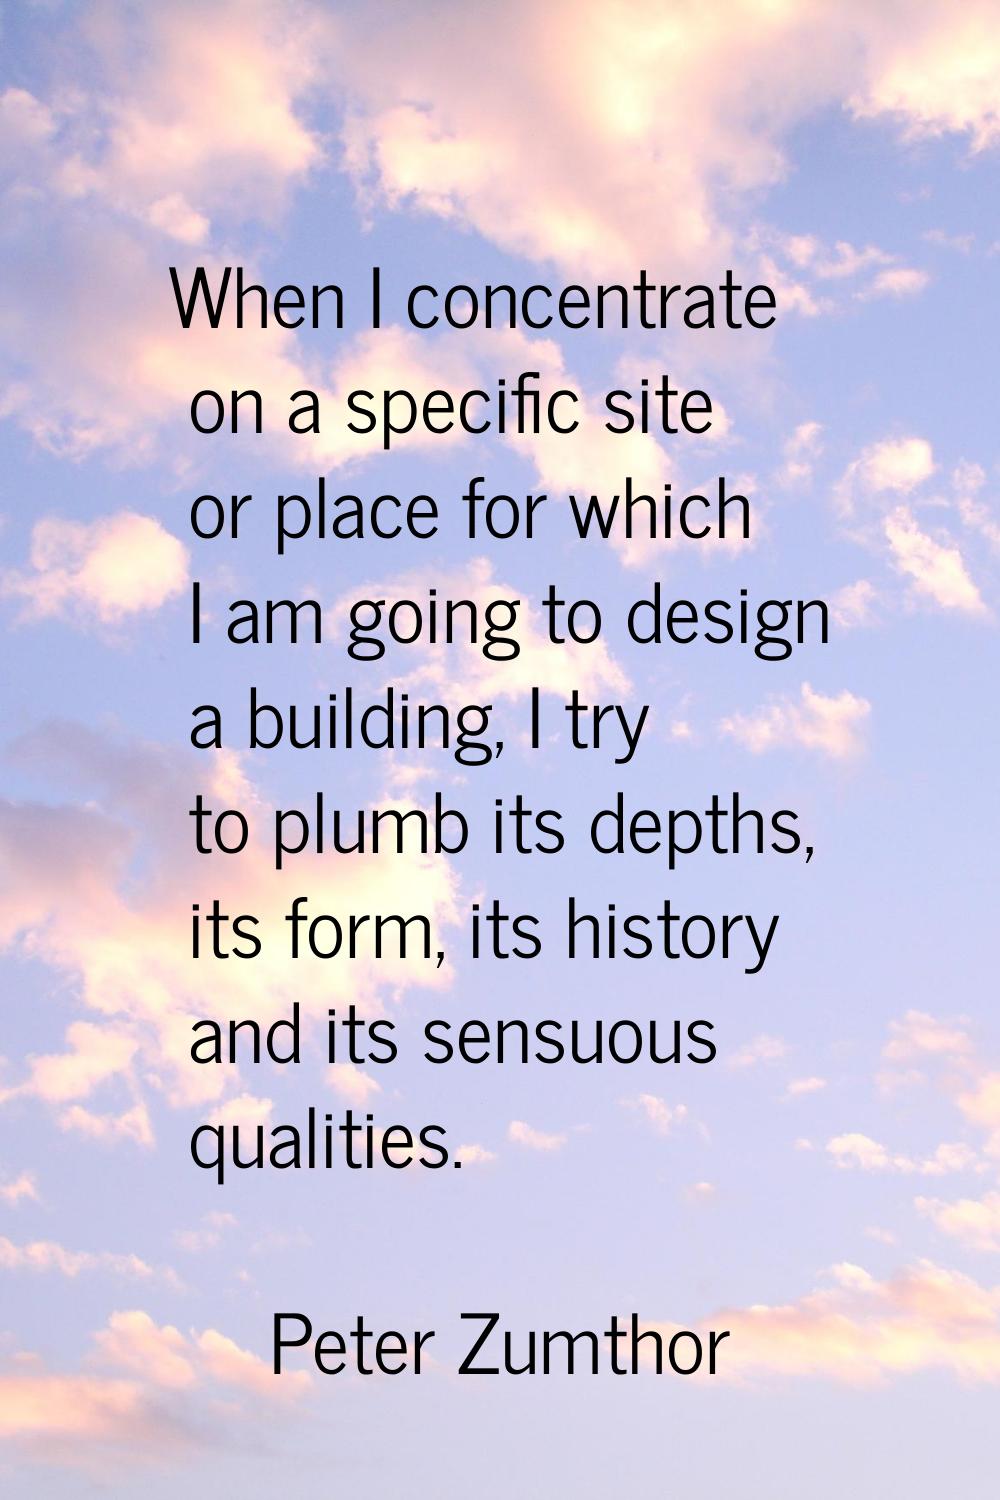 When I concentrate on a specific site or place for which I am going to design a building, I try to 